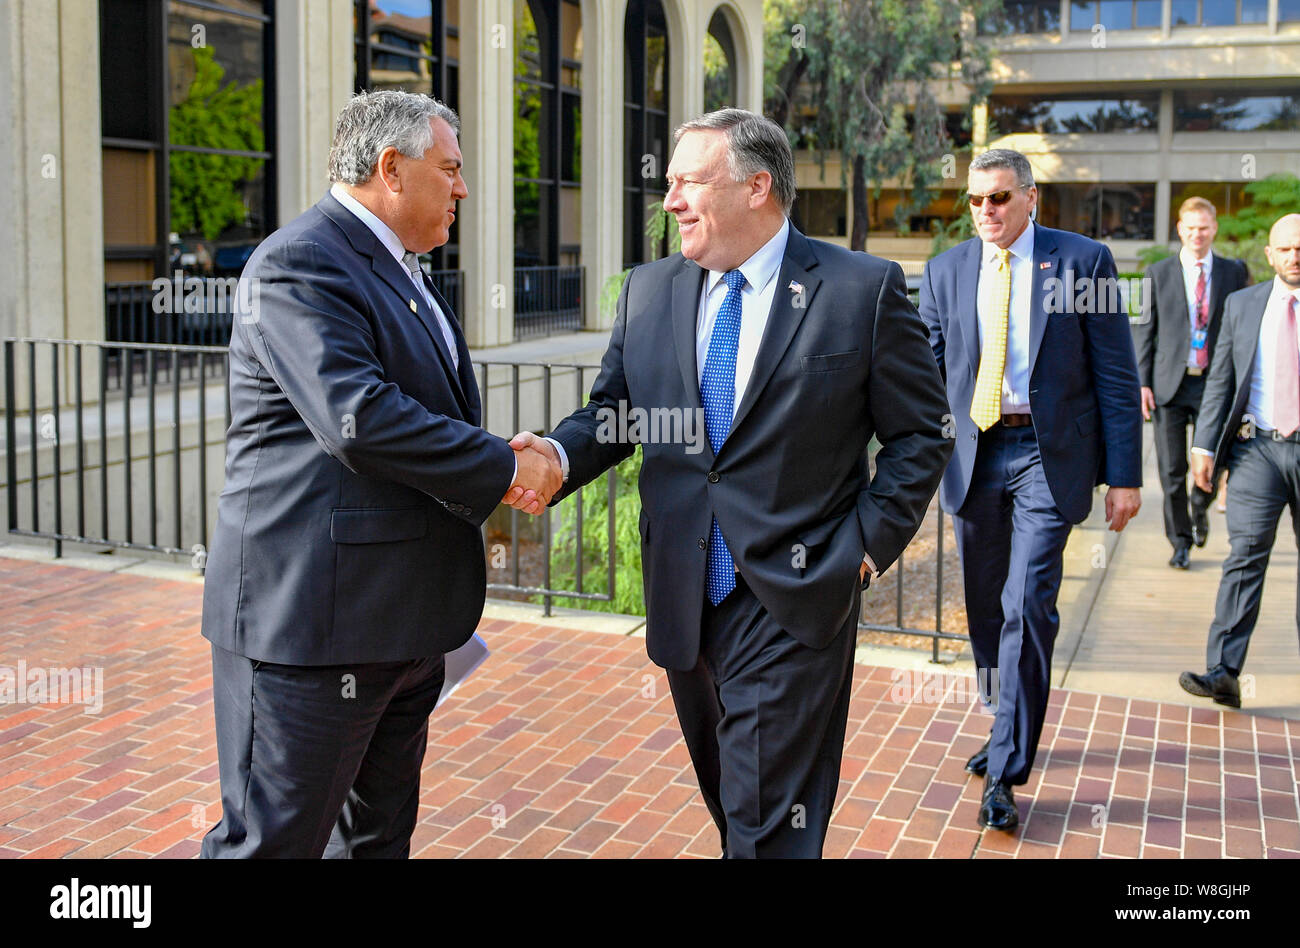 U.S. Secretary of State Michael R. Pompeo arrives at the Hoover Institution at Stanford University for the final day of the Australia-U.S. Ministerial Stock Photo